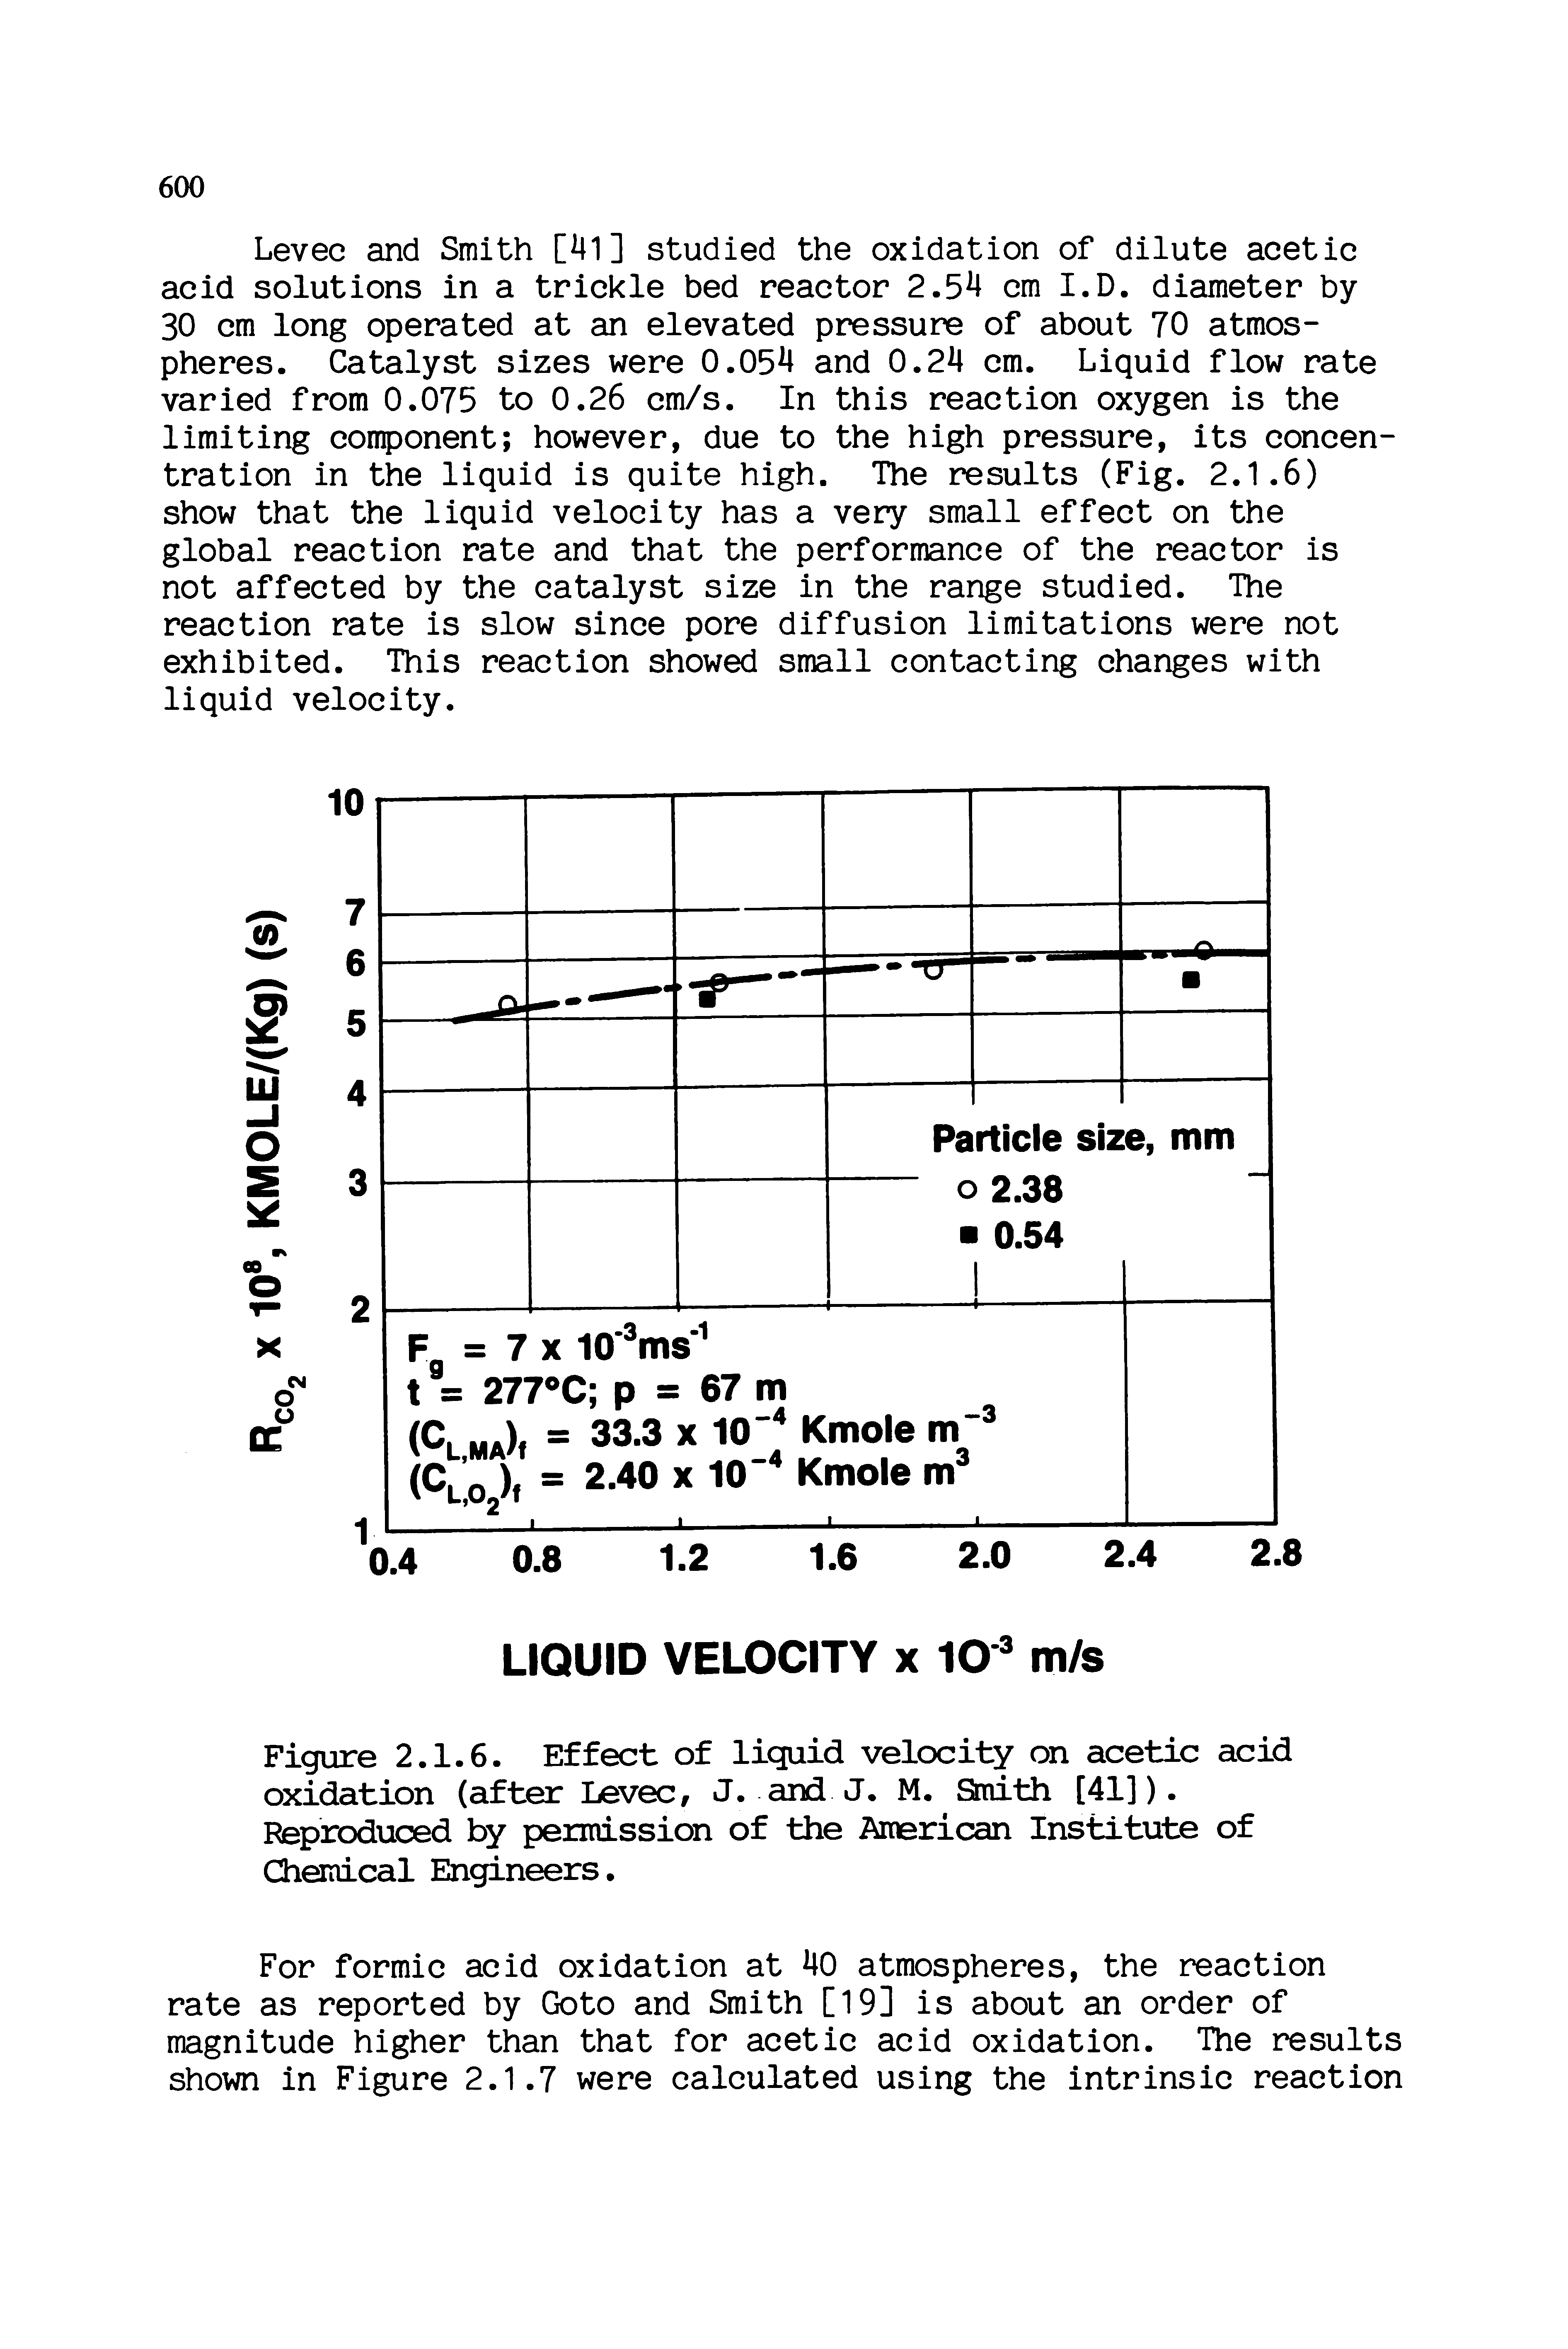 Figure 2.1.6. Effect of liquid velocity on acetic acid oxidation (after Levee, J. and J. M. Smith [41]). Reproduced by permission of the American Institute of Chemical Engineers.